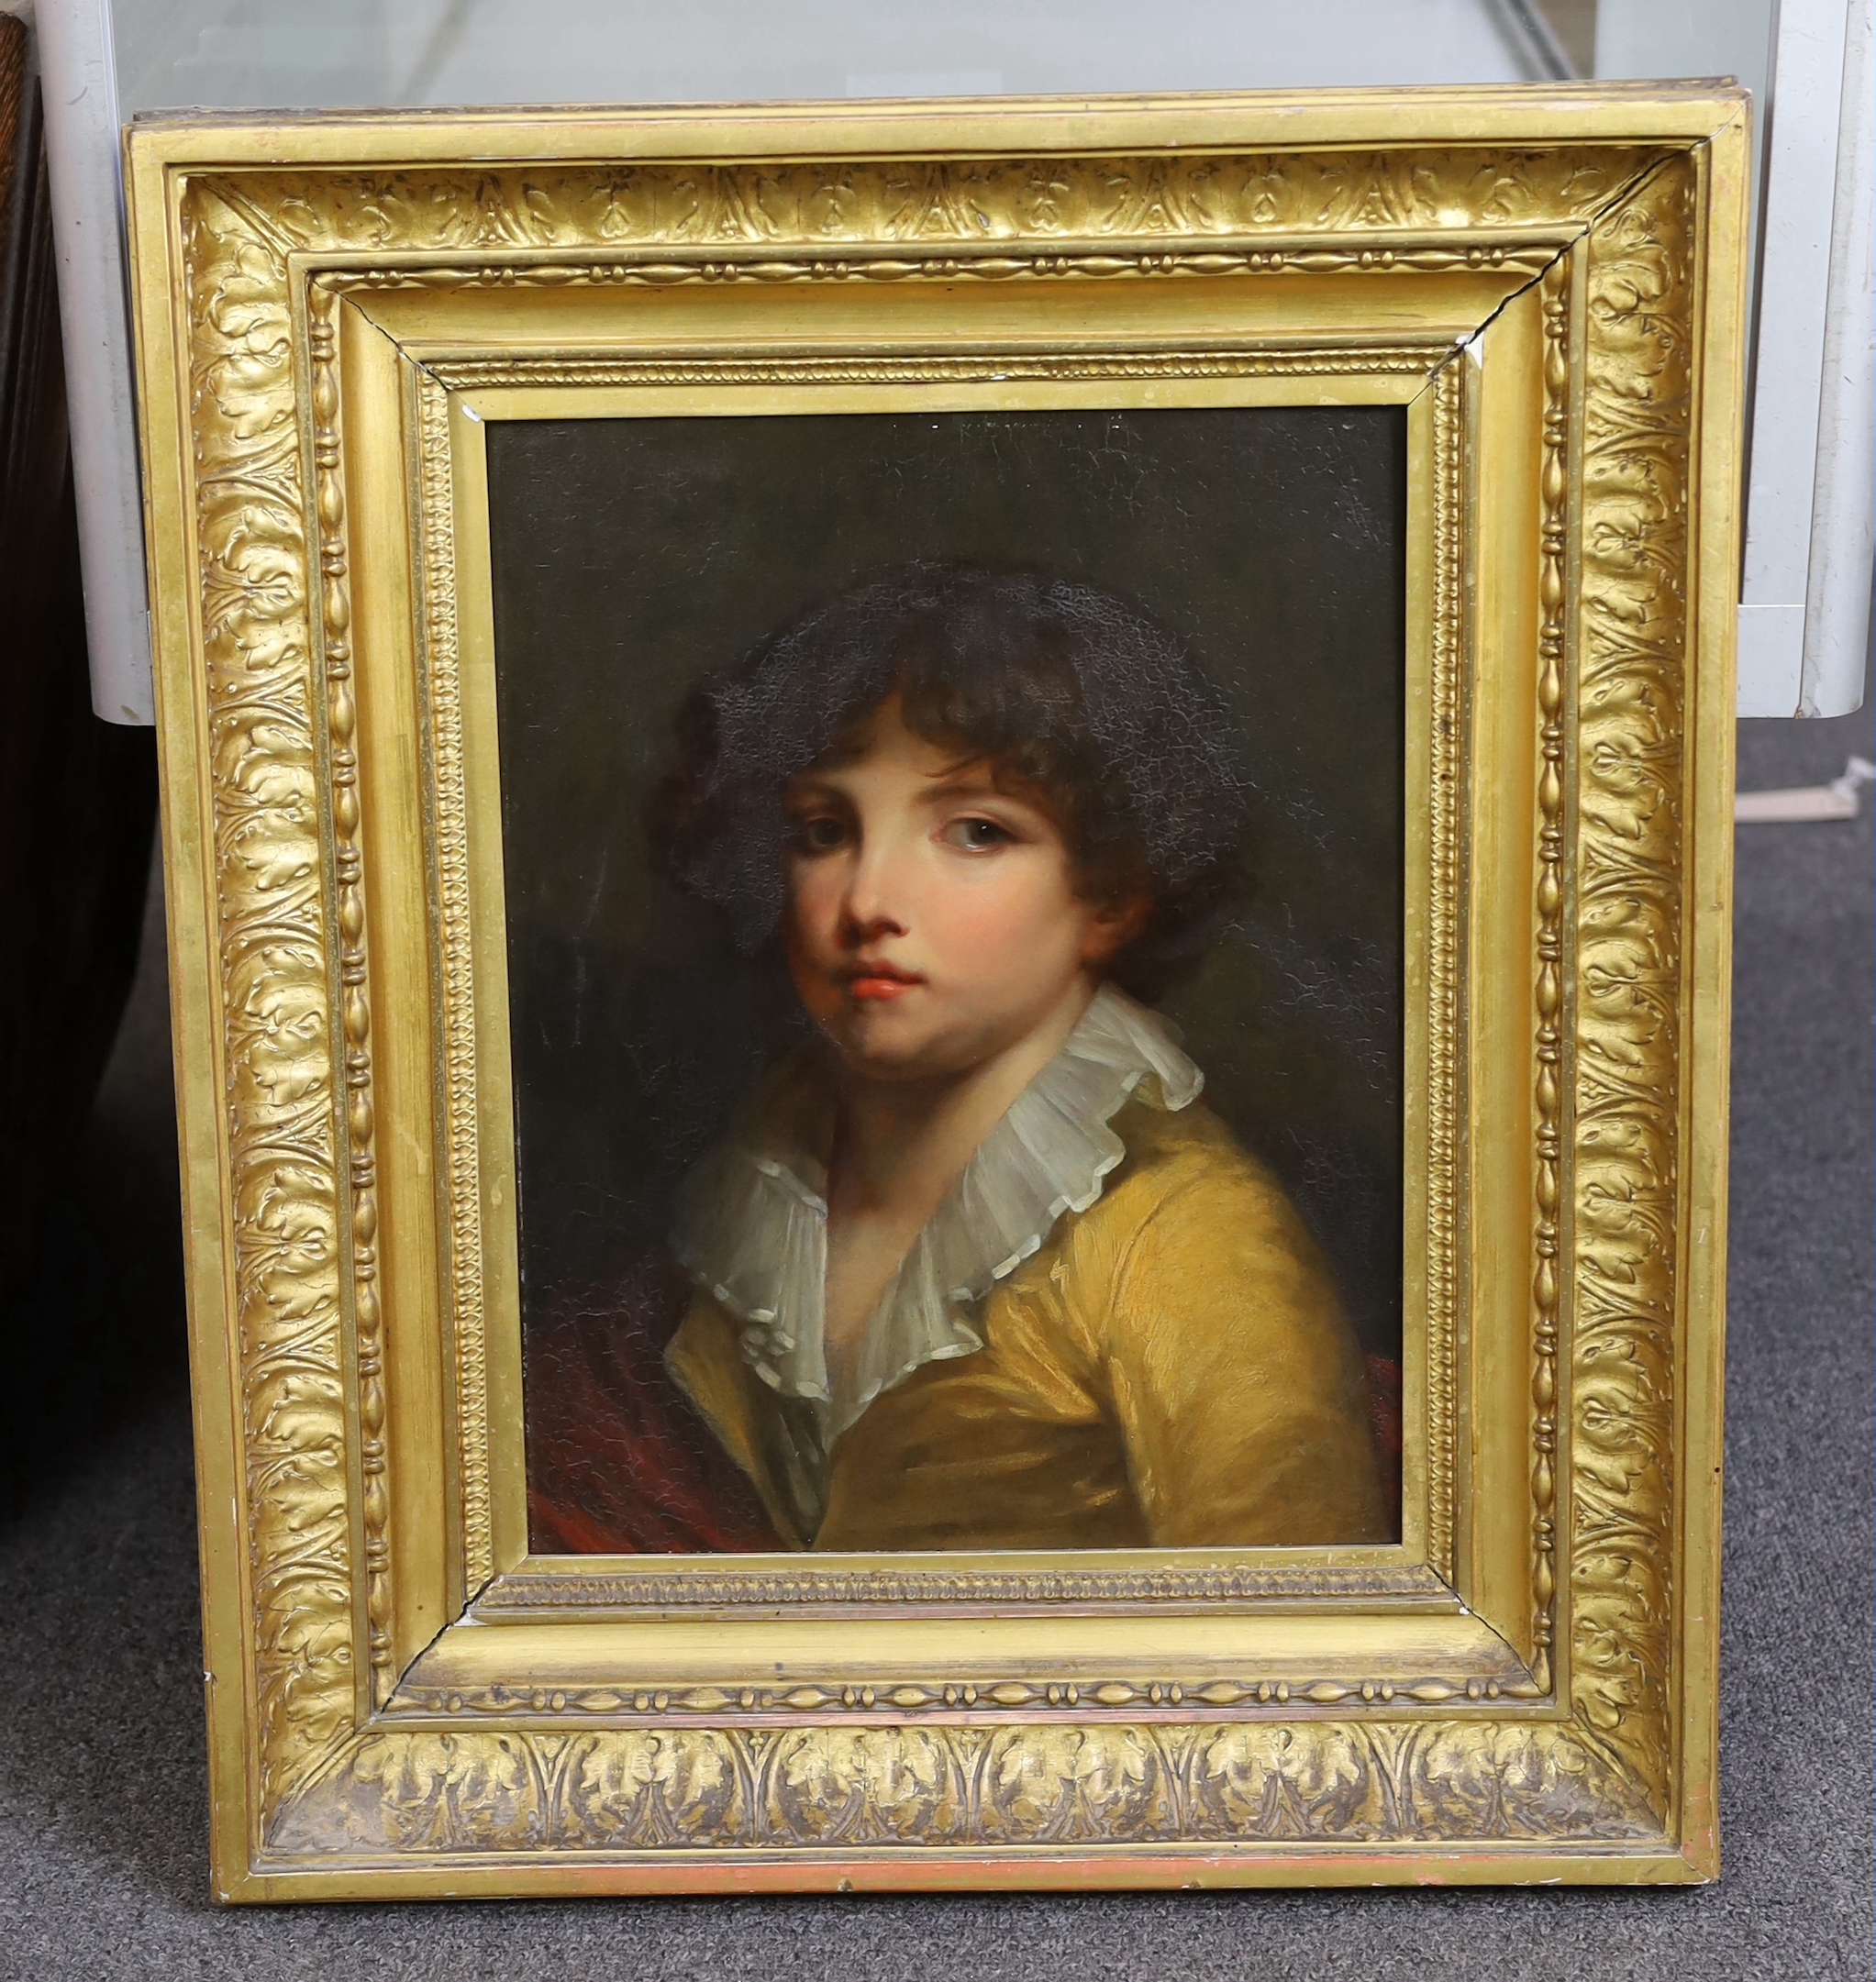 19th century Continental School Portrait of a youth wearing a yellow jacketoil on wooden panel39 x - Image 2 of 3